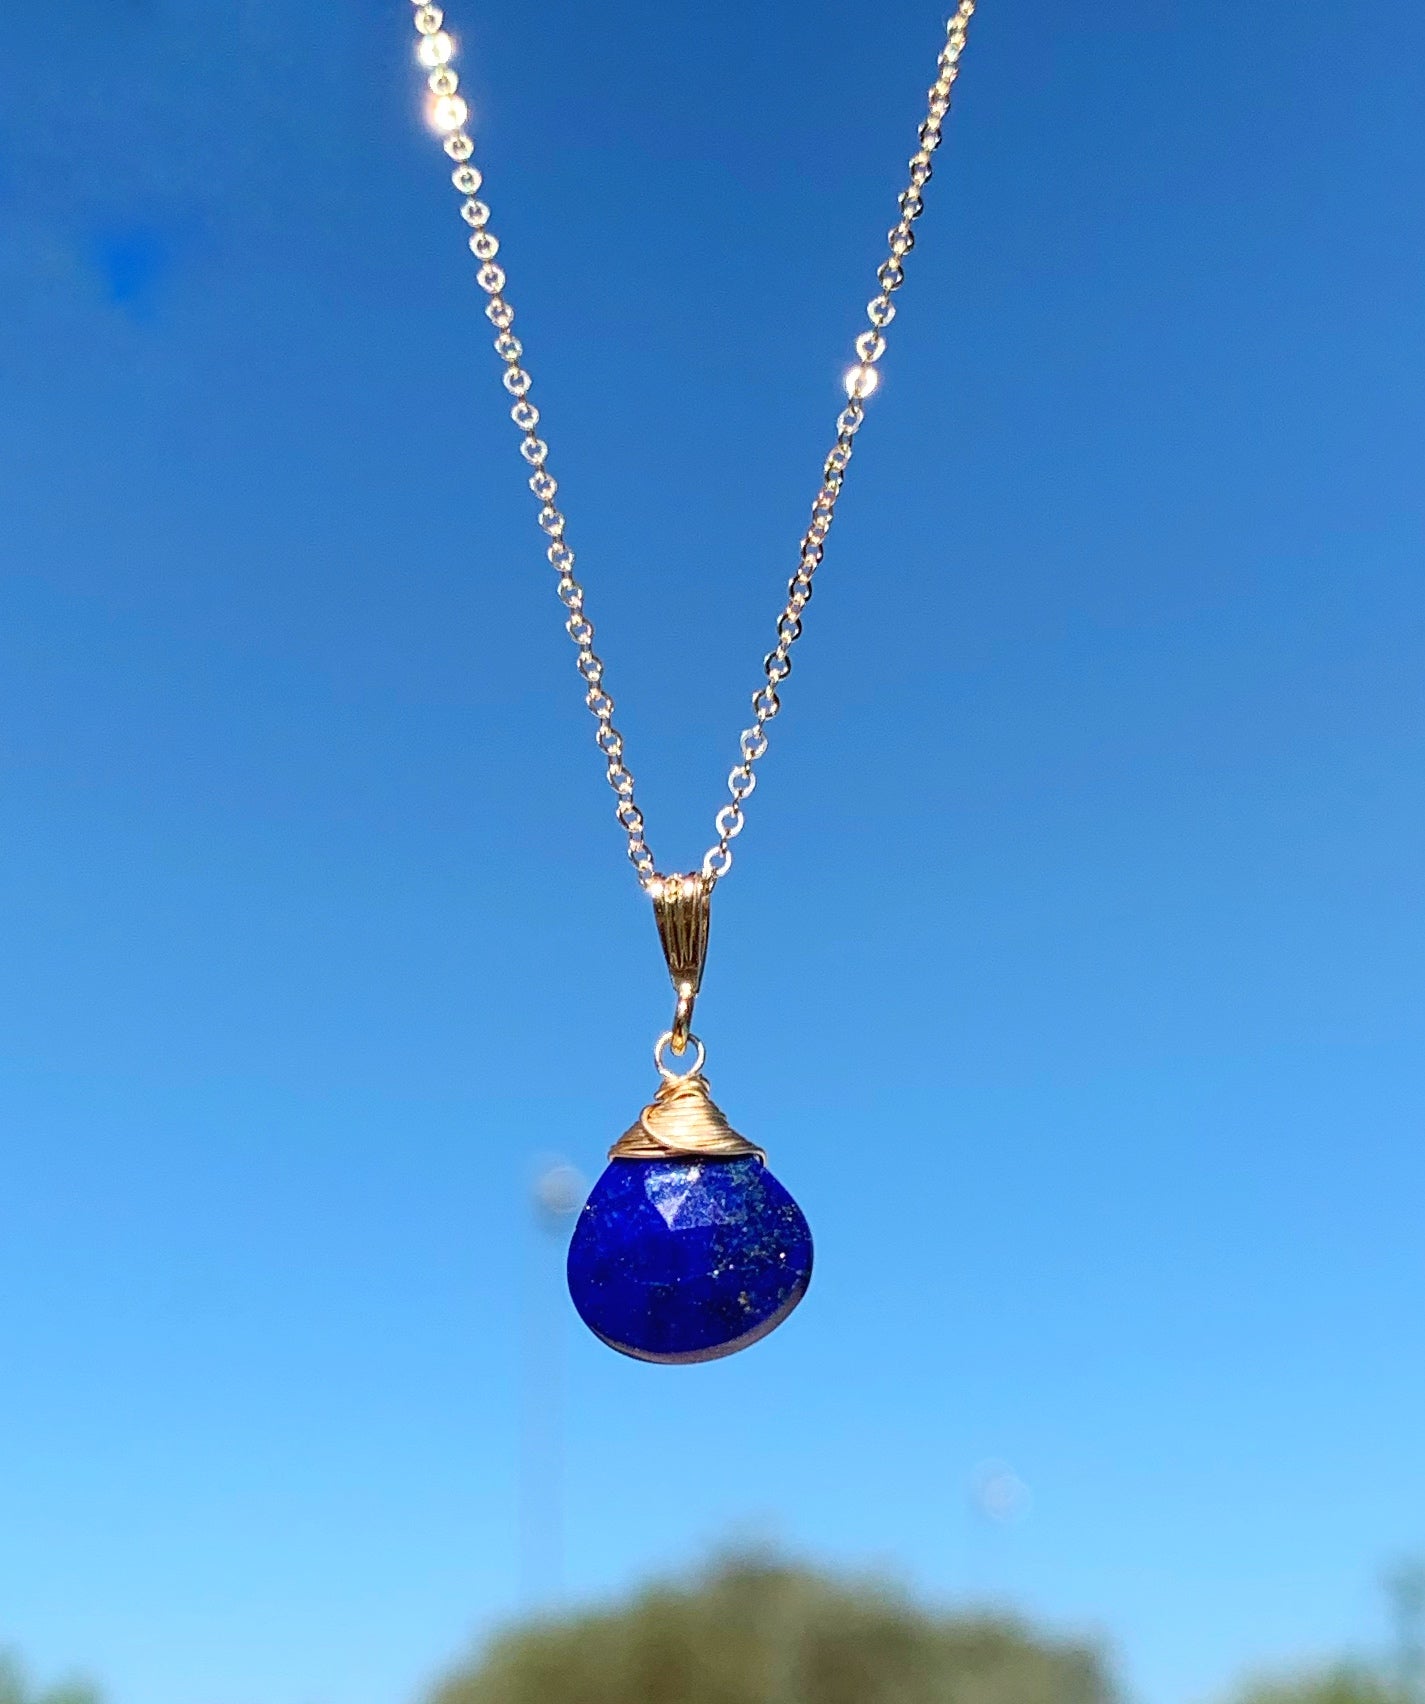 the mermaids and madeleines neptune necklace is created with blue lapis and 14k gold filled findings and chain. this one is suspended with blue sky in the background!